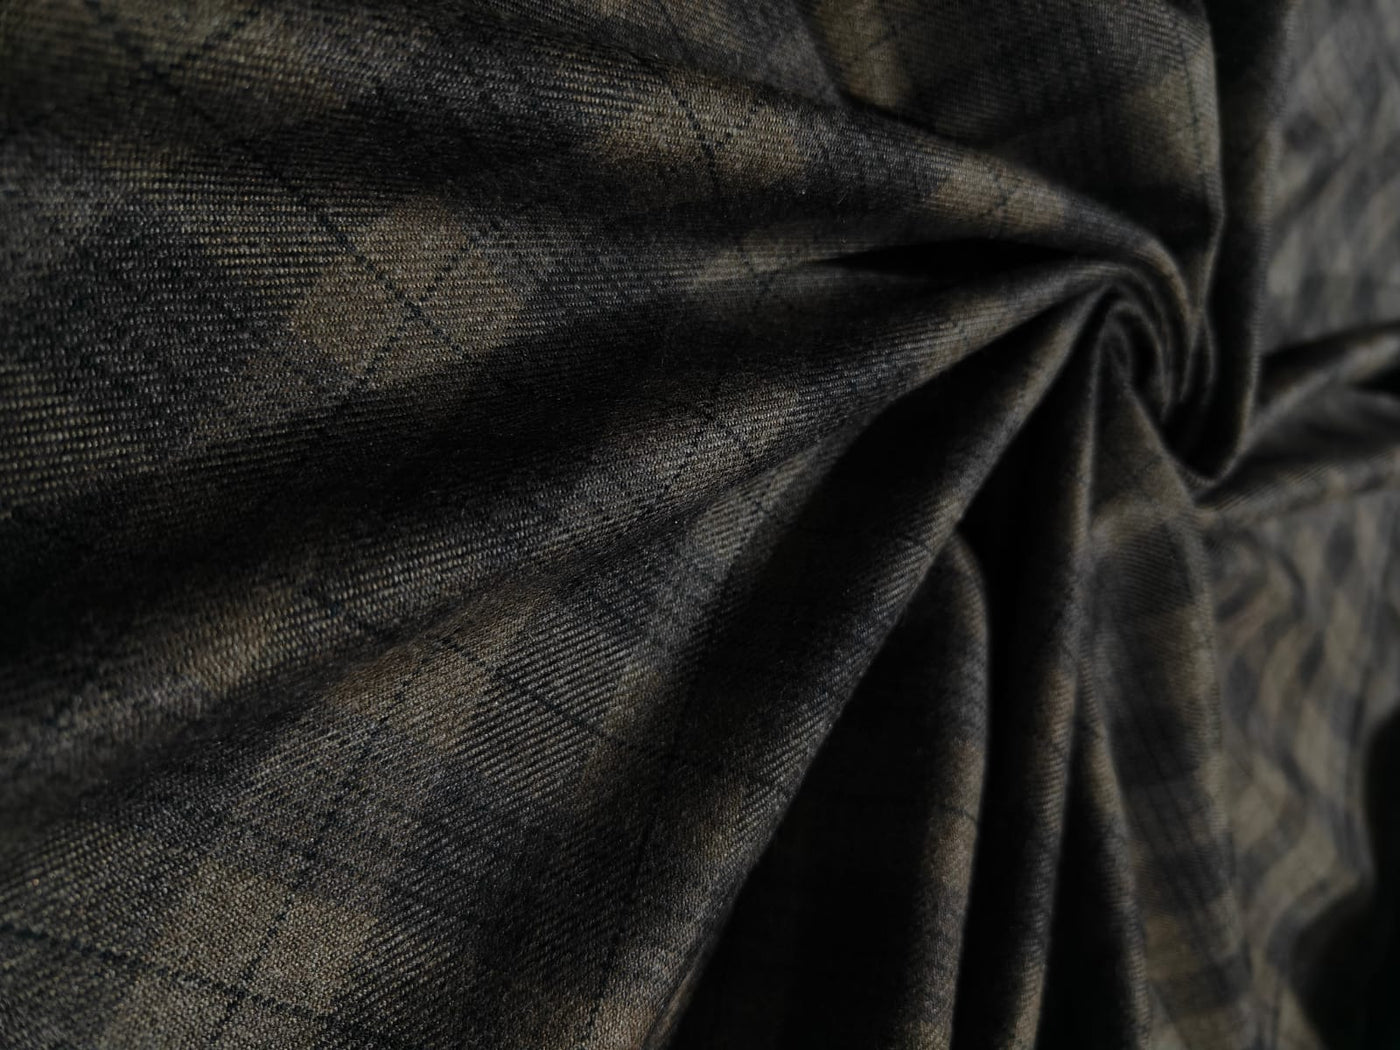 Light weight Suiting plaids TWEED Fabric 58" available in 2 colors DARK BROWN AND BROWN PLAIDS AND BLACK AND GREY PLAIDS [15825/24]